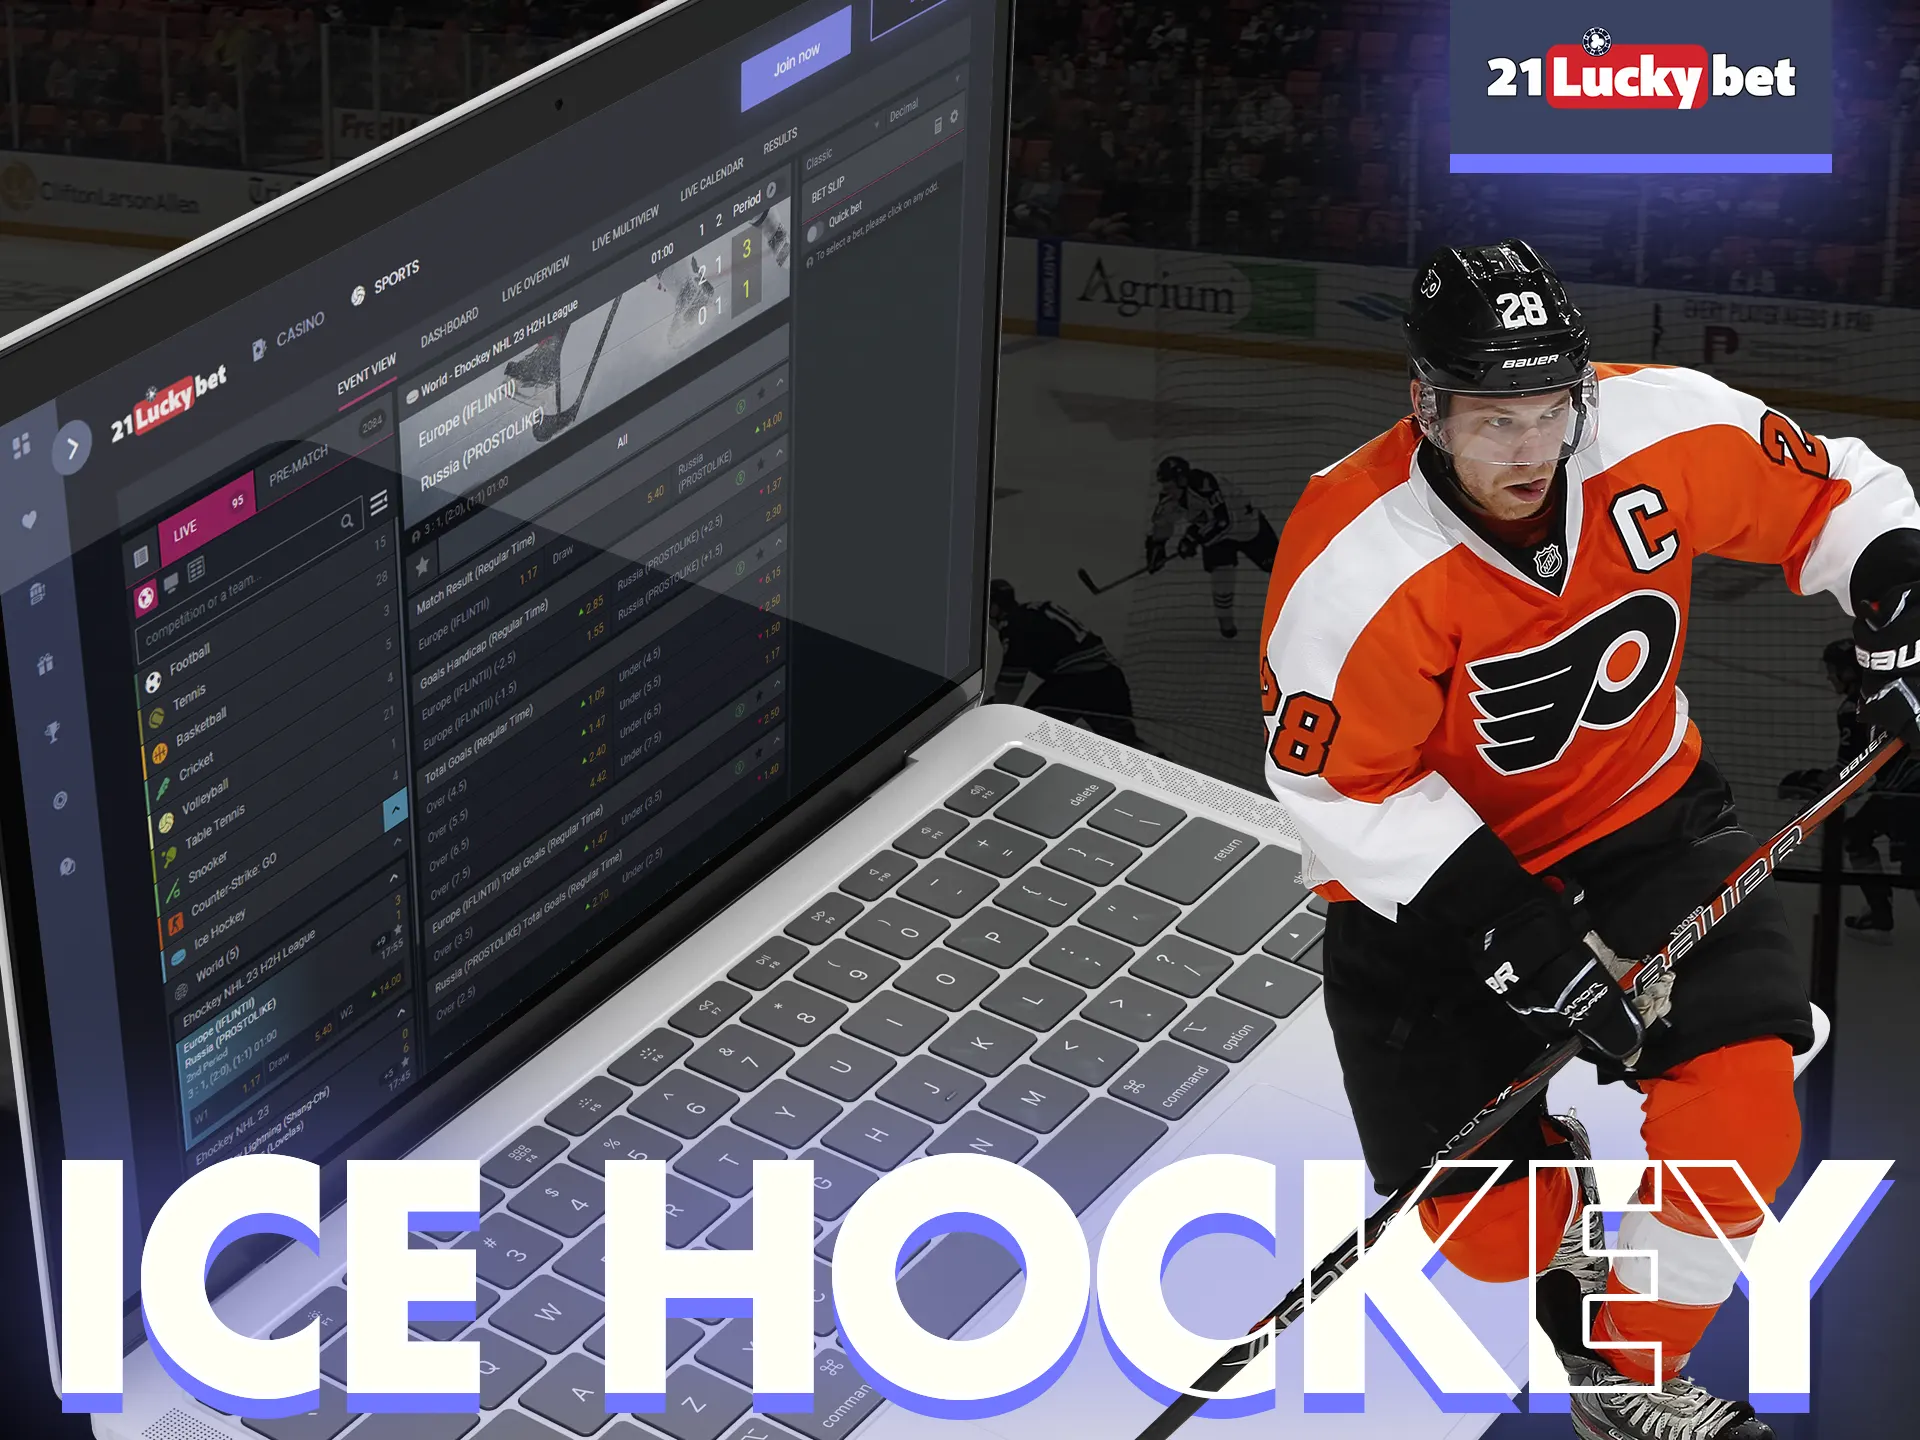 Bet on ice hockey with 21luckybet.